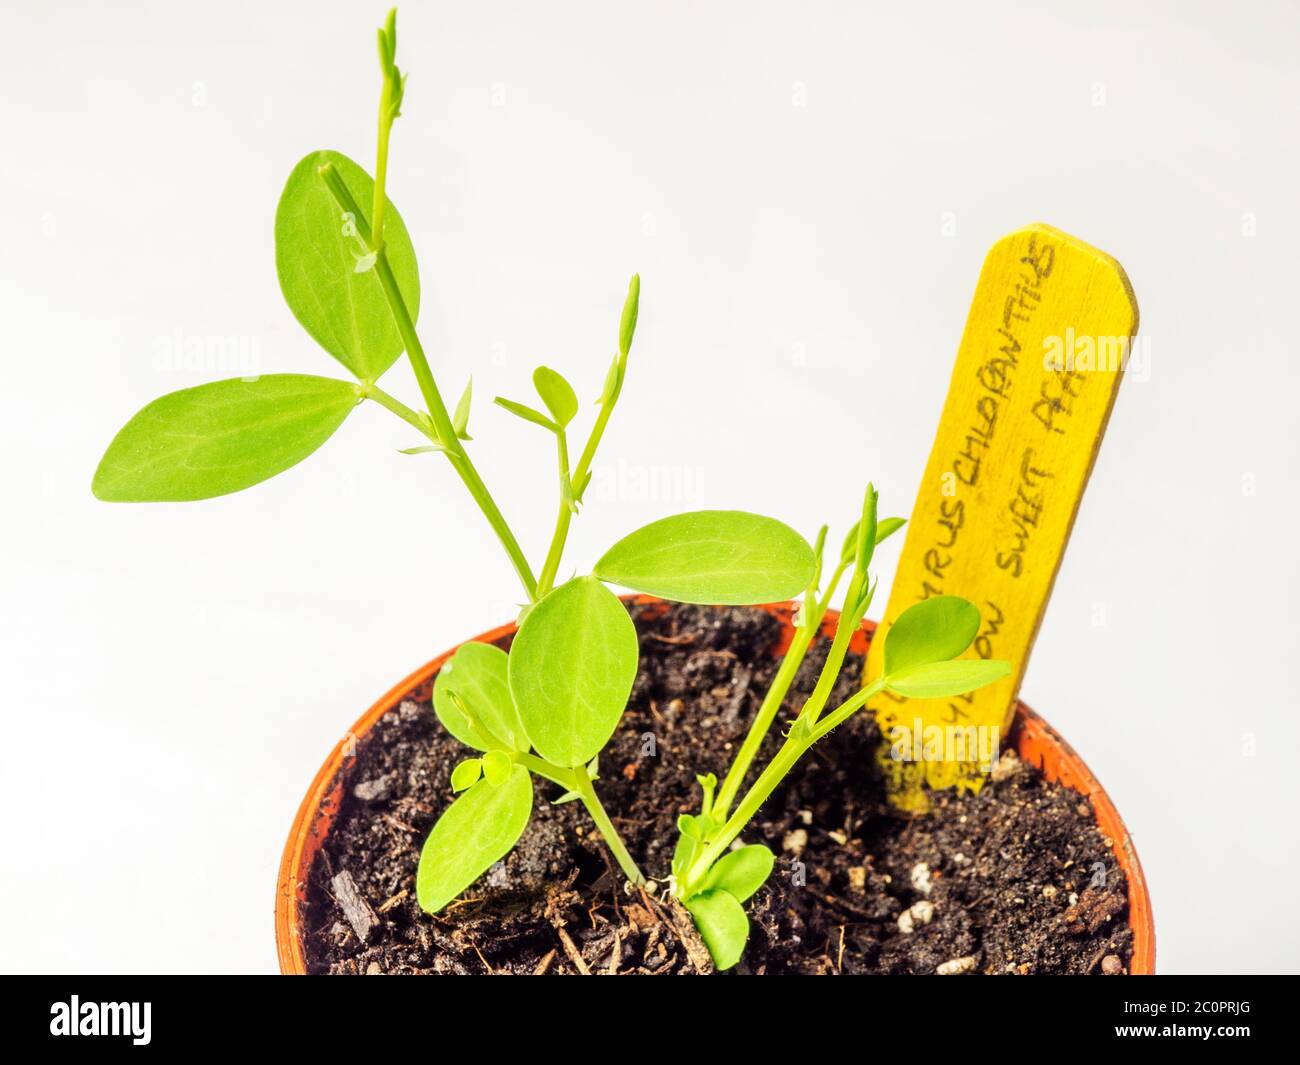 Lathyrus chloranthus sweet peas seedling with wooden label in a plant pot on a white background Stock Photo